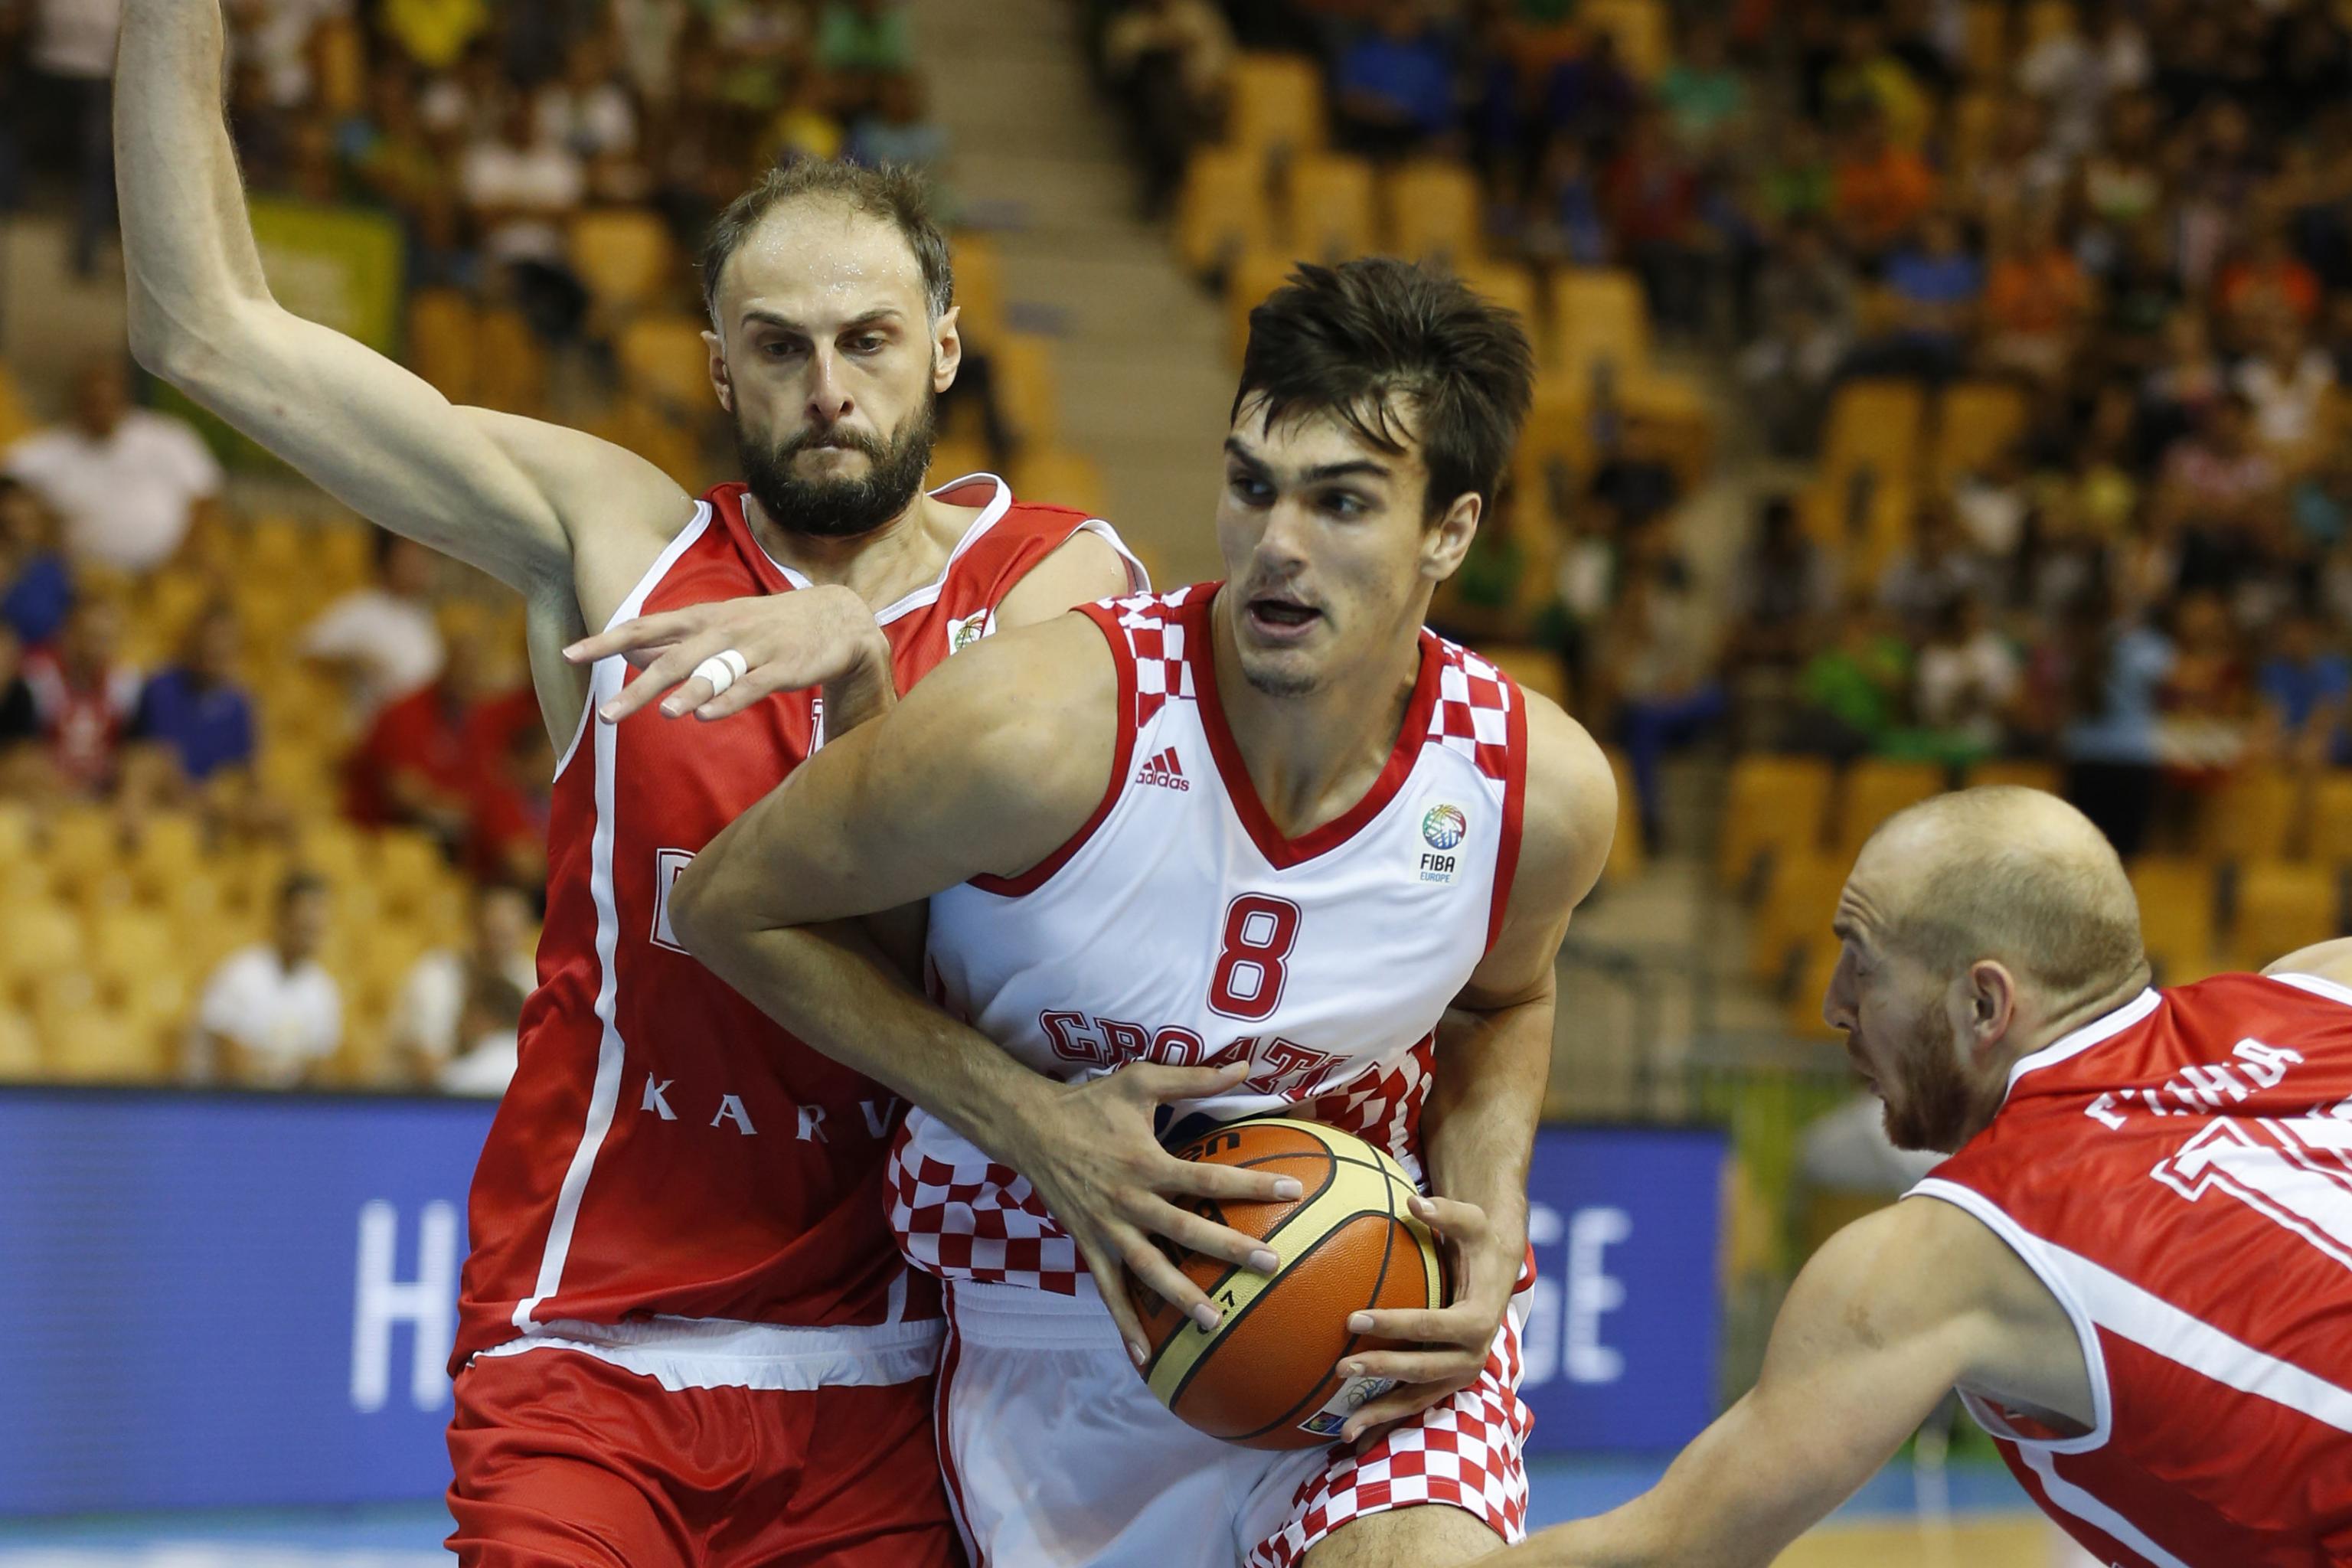 Report: Dario Saric Would Come To U.S. If Drafted By Celtics, Lakers 